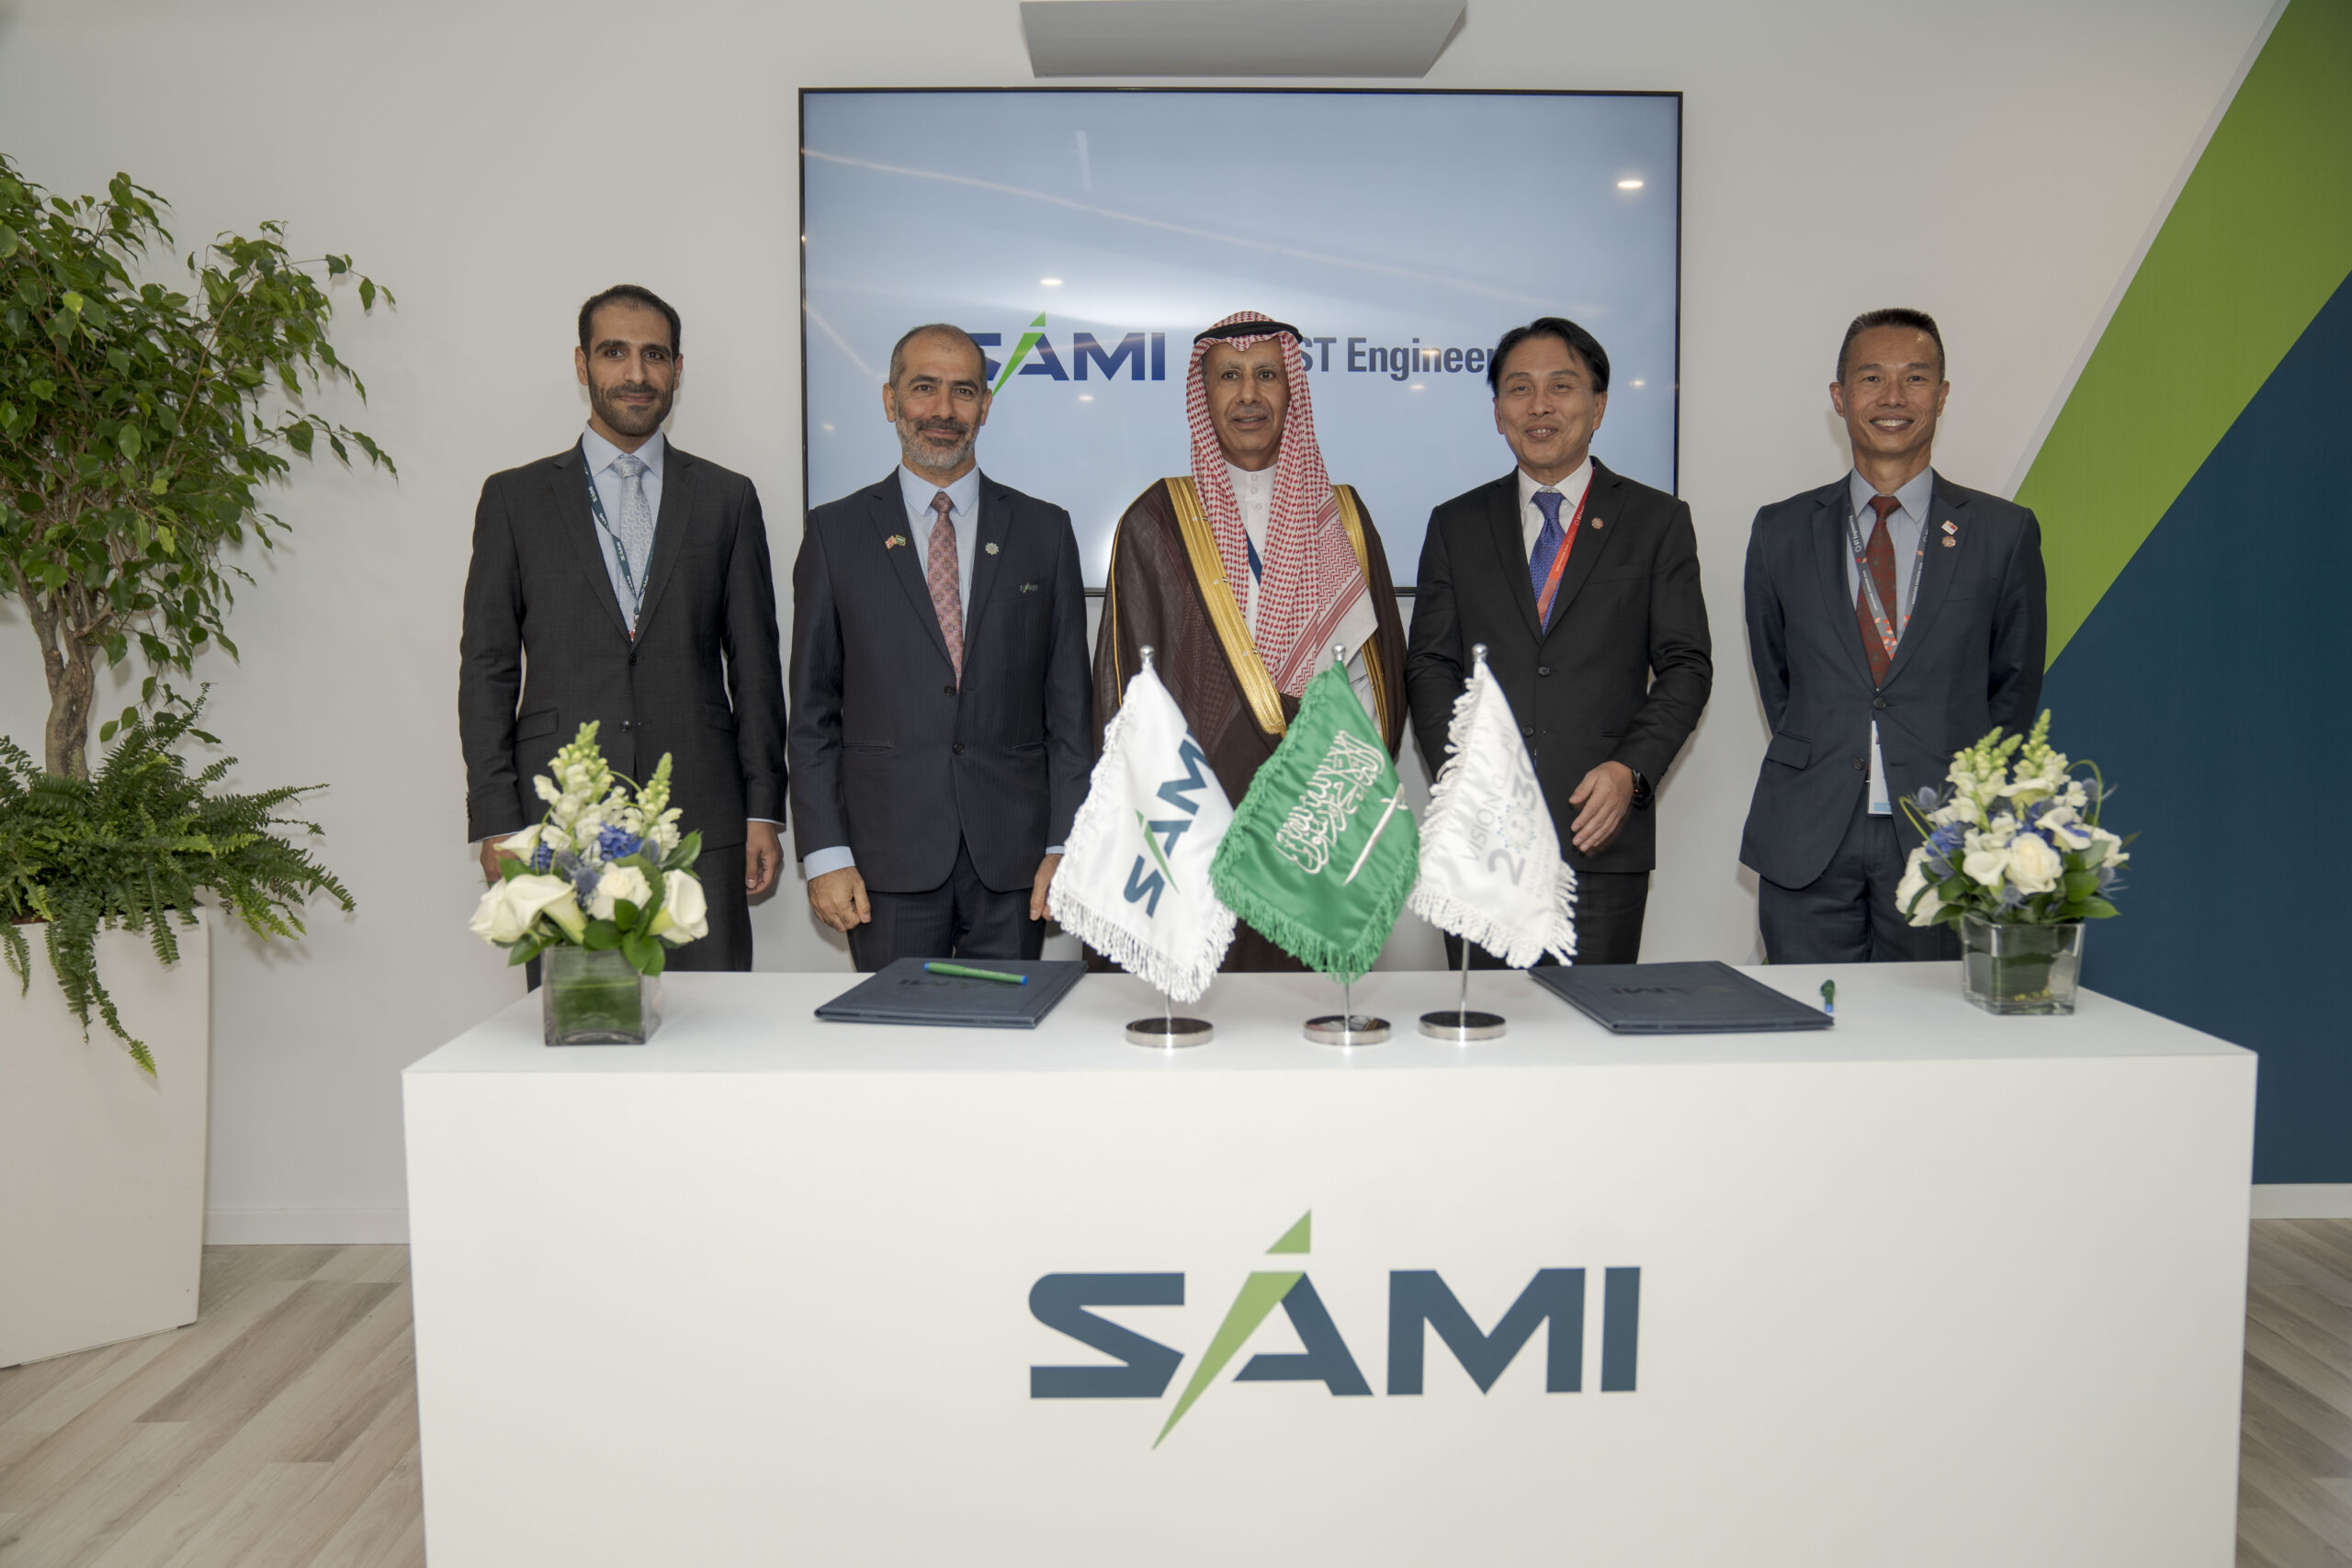 Representatives from SAMI and ST Engineering sign a Joint Venture at the Farnborough Airshow in July 2022.